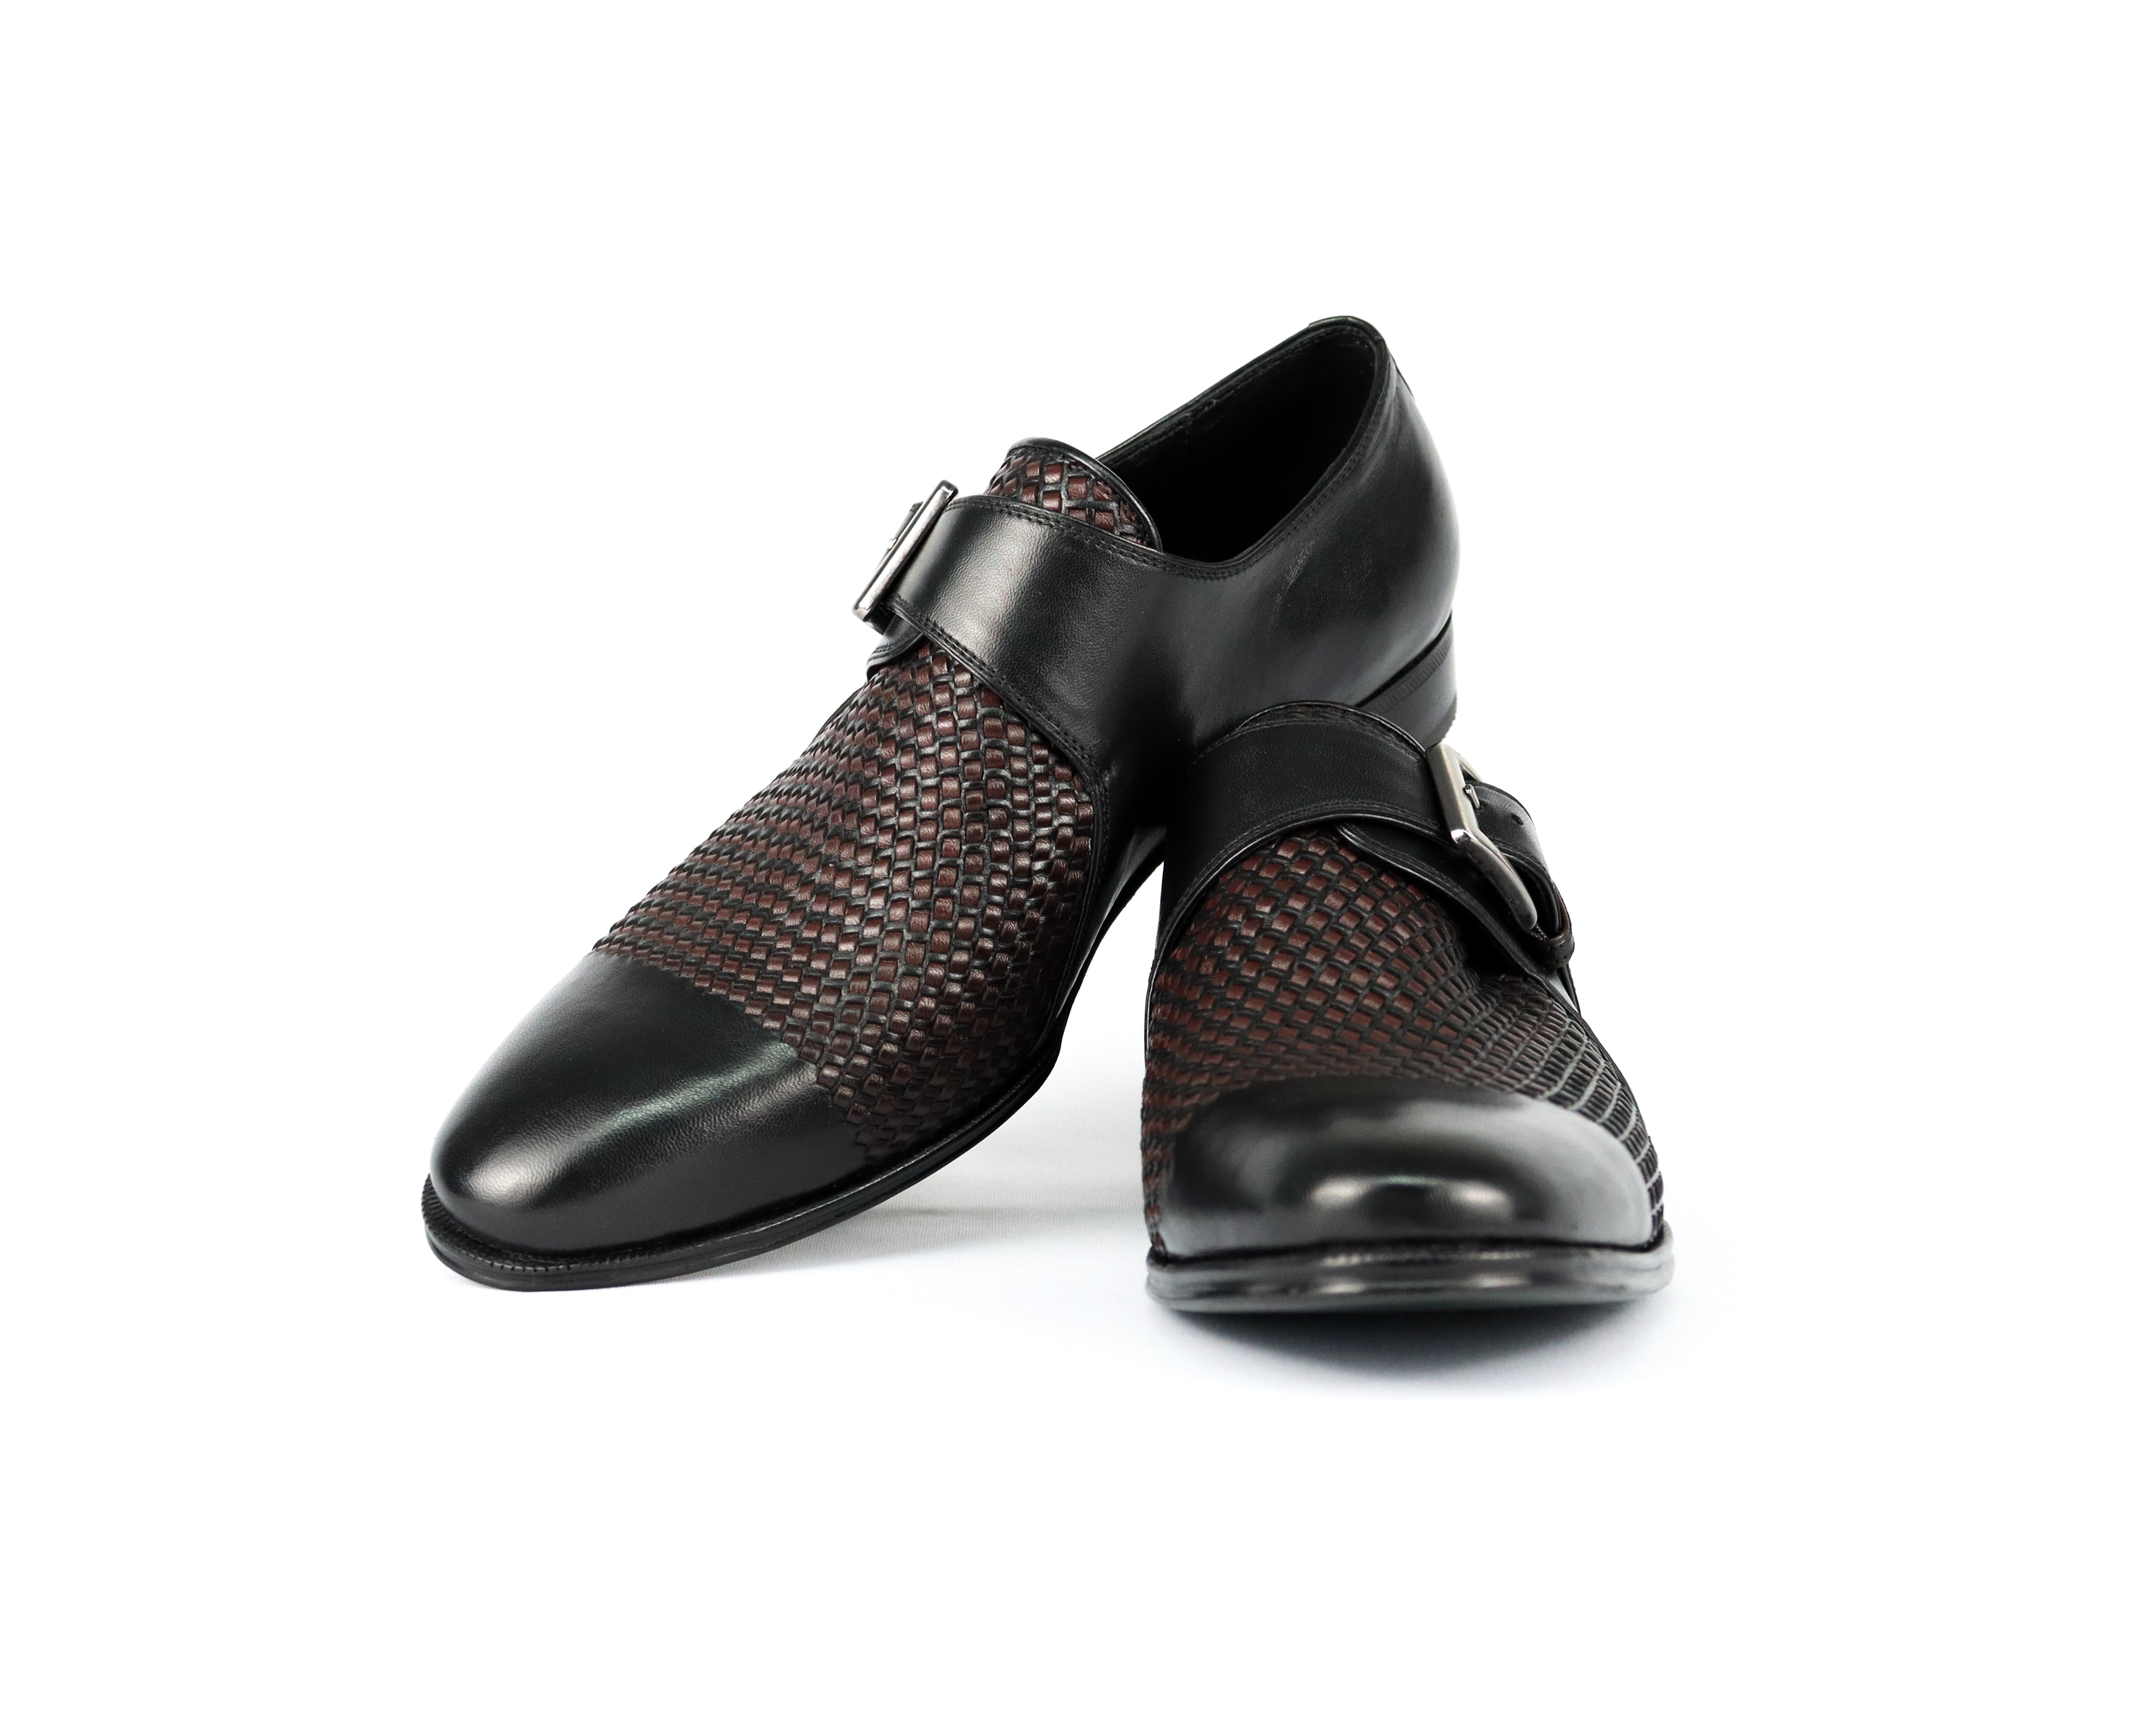 Monk Carlos Shoe - Smooth leather with Manual Tresse detail